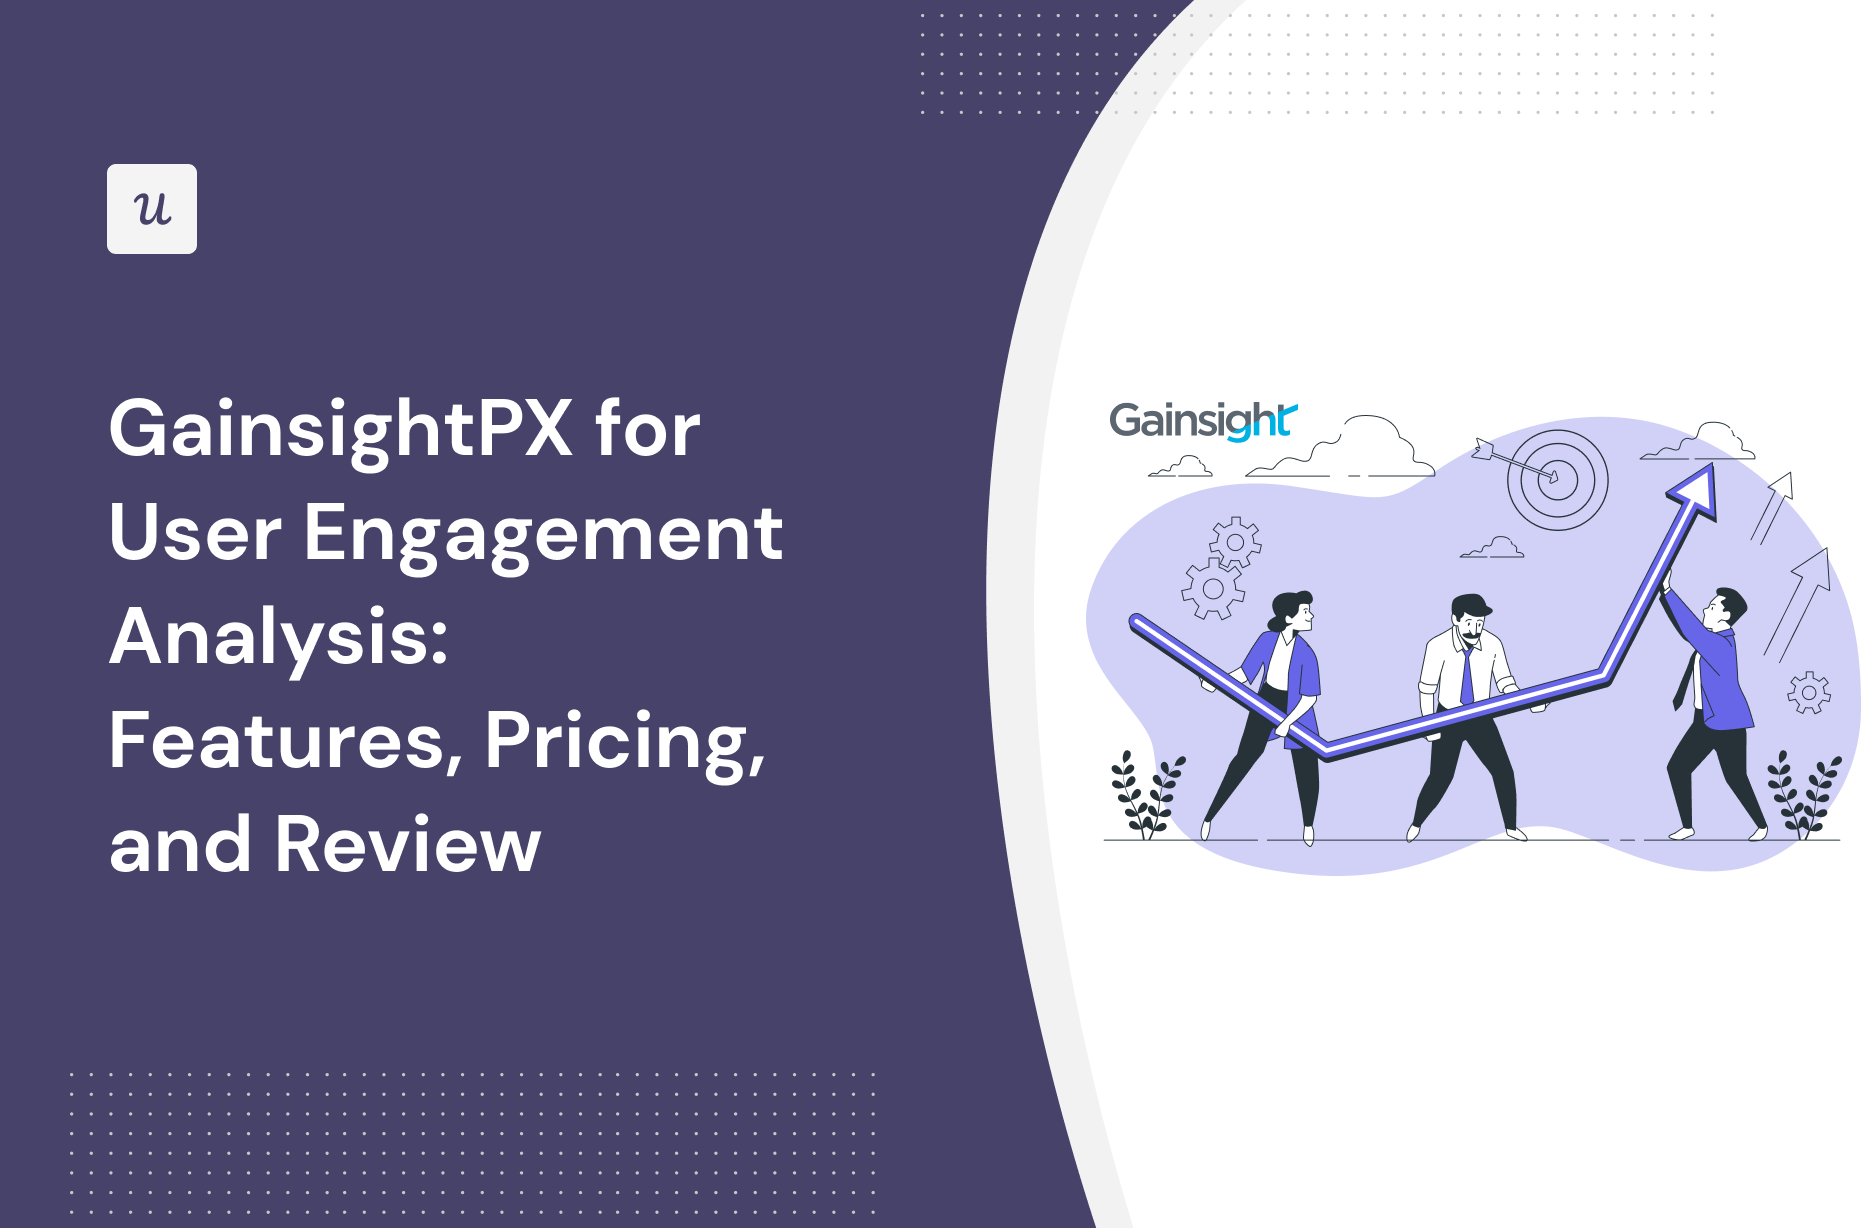 GainsightPX for User Engagement Analysis: Features, Pricing, and Review